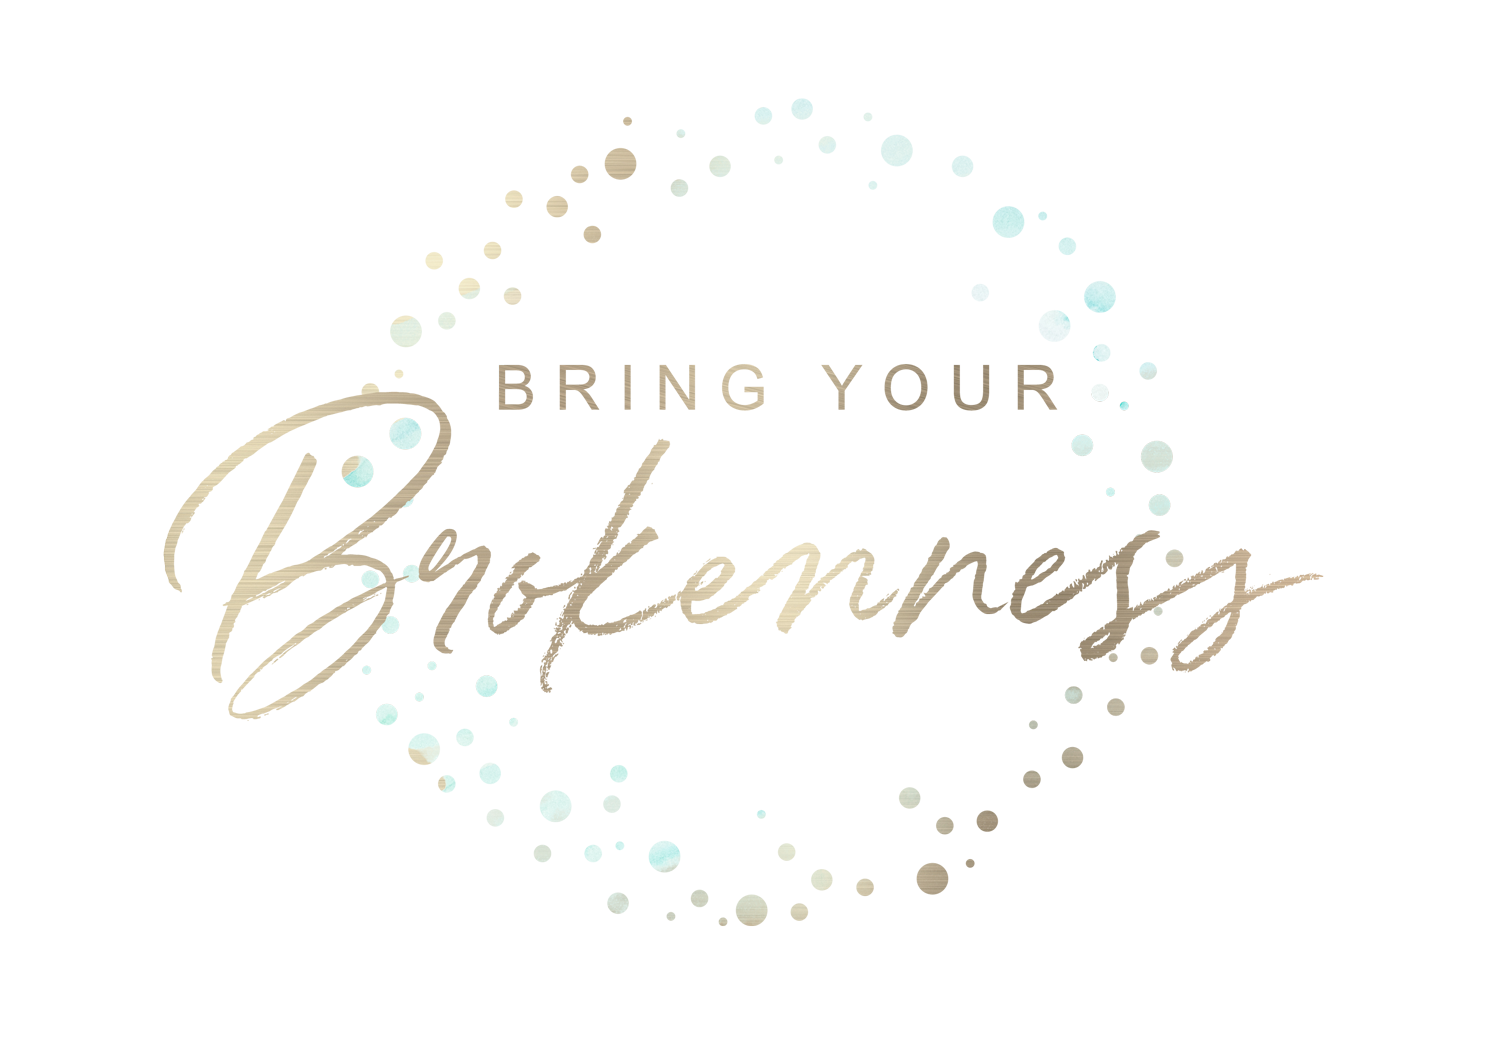 Bring Your Brokenness